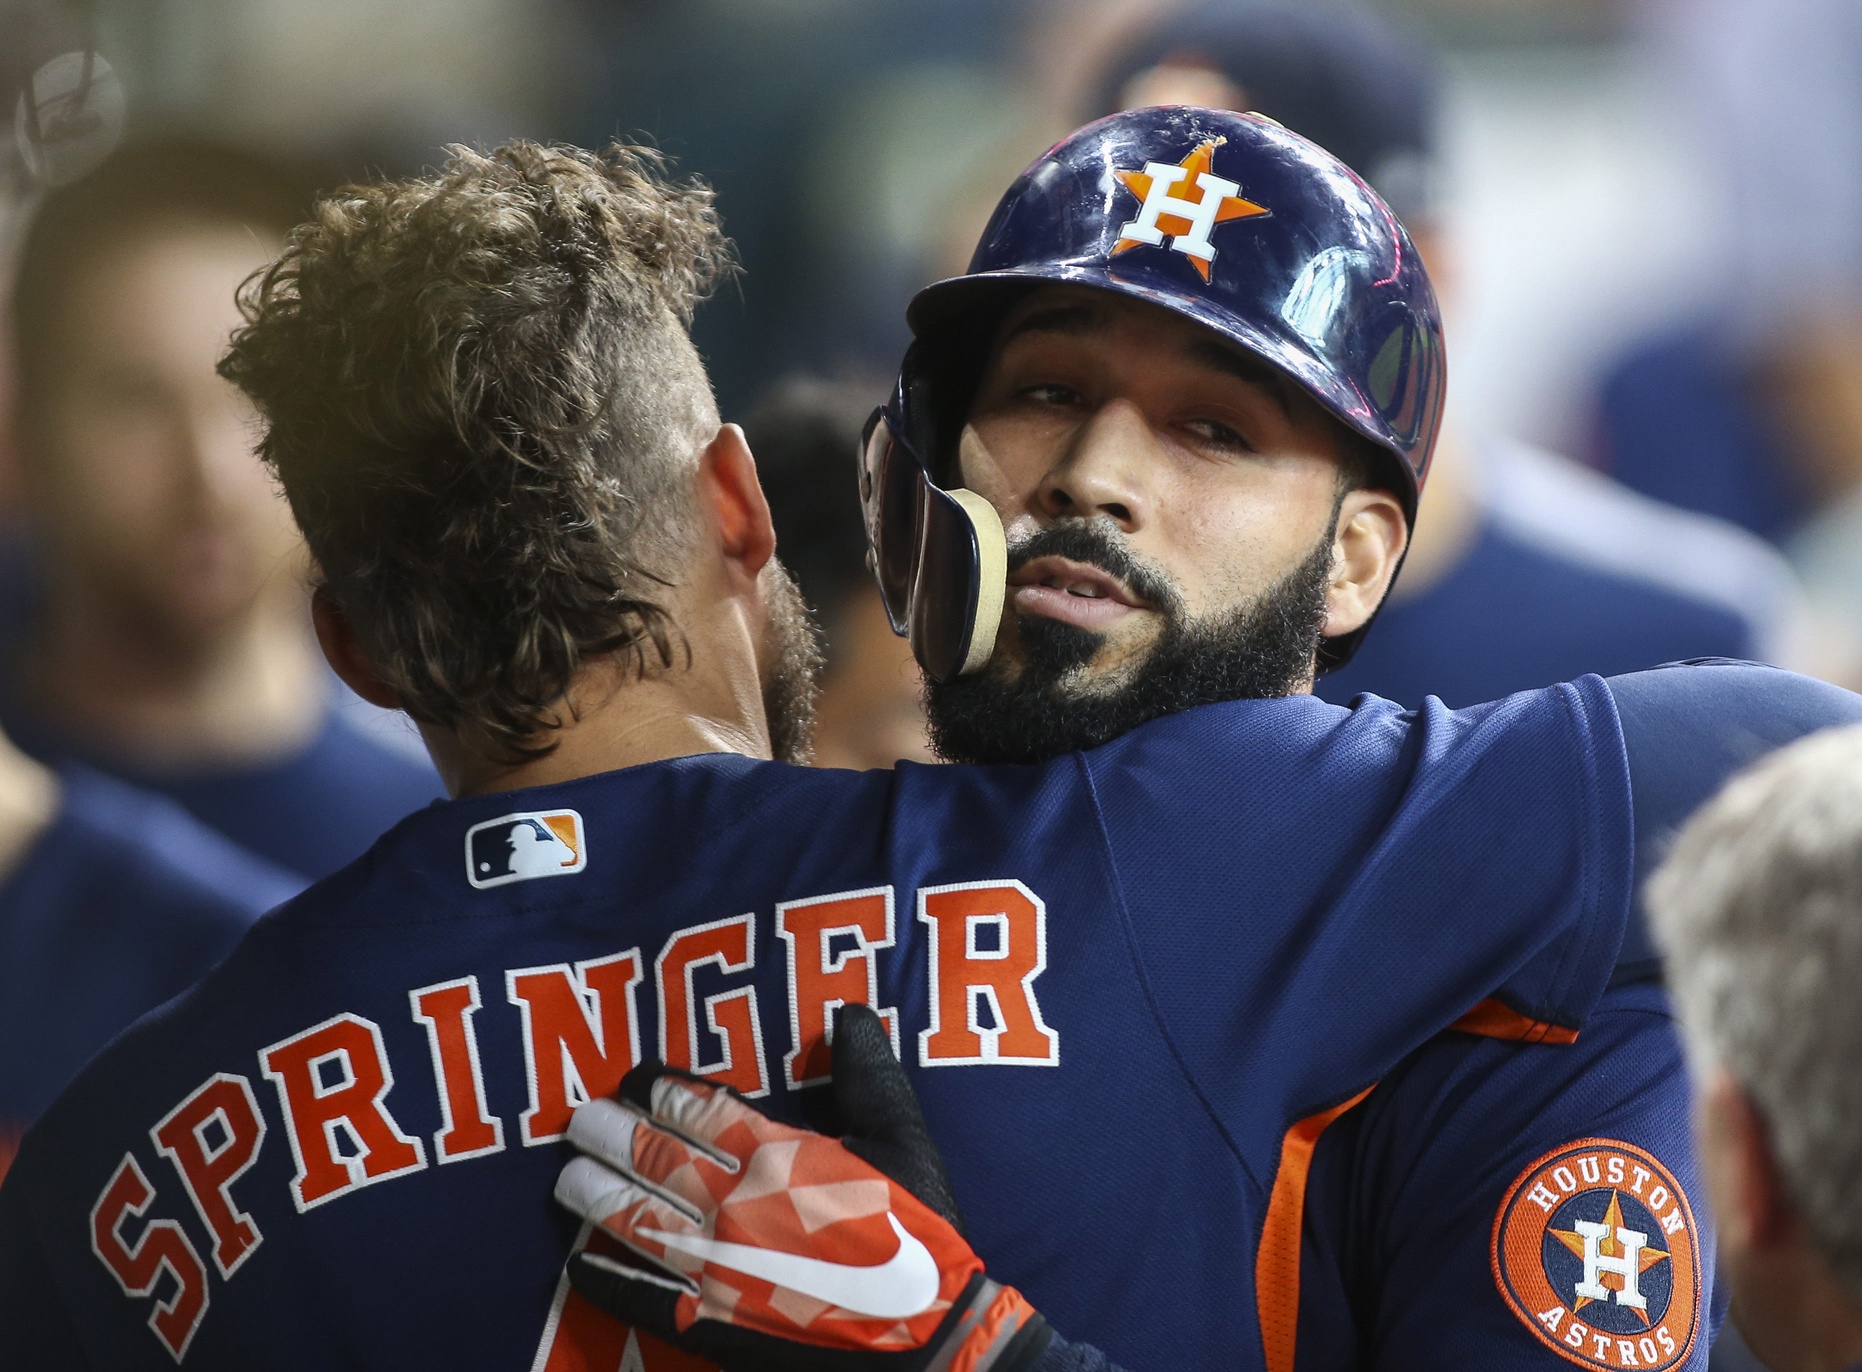 The Astros' Marwin Gonzalez is one reason the team is dominating this season.